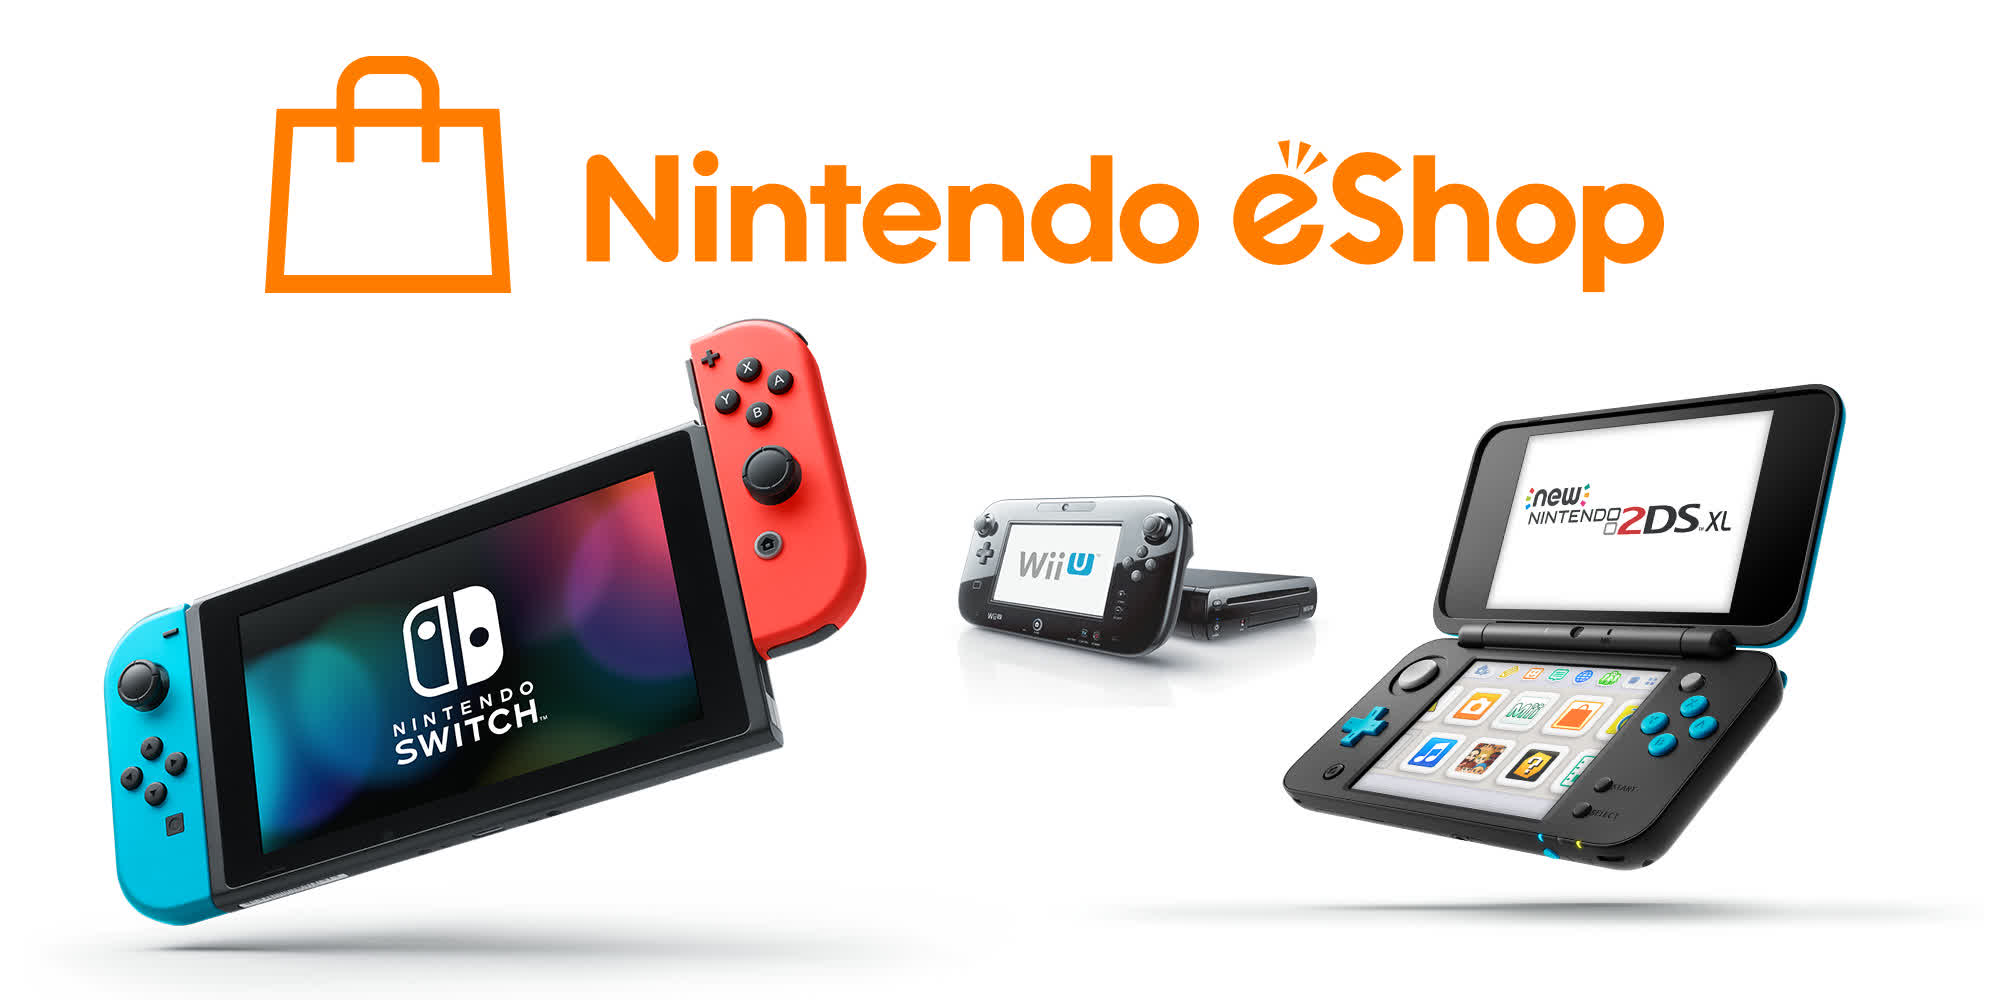 YouTuber purchased every Wii U and 3DS eShop game for $22,000